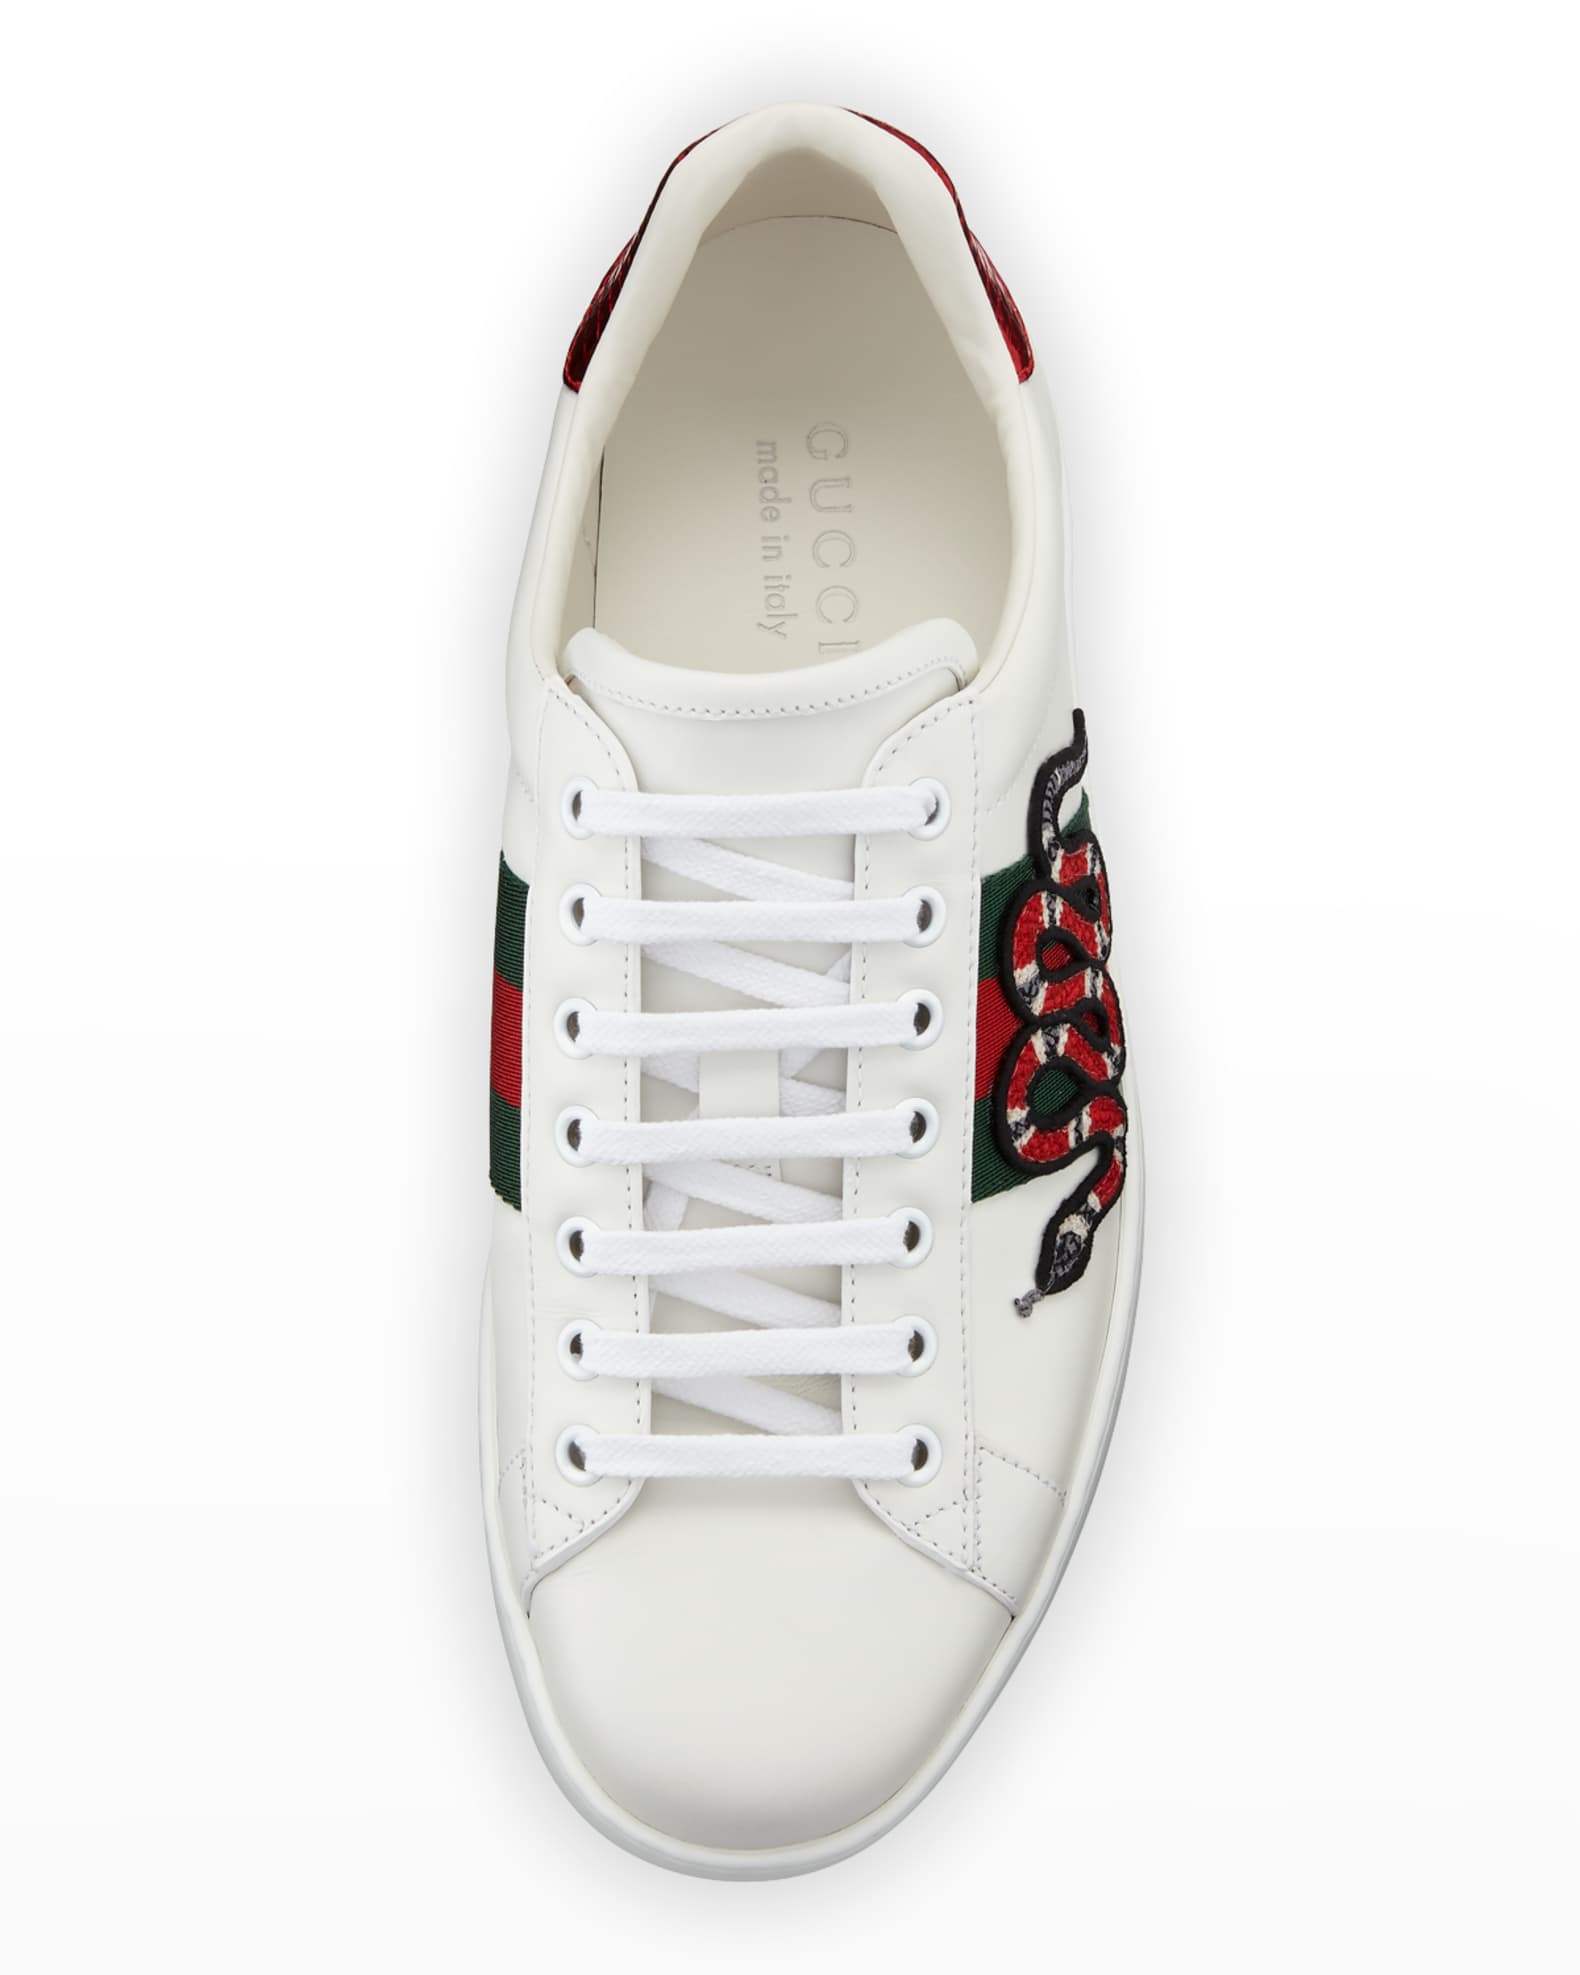 Gucci New Ace Men's Snake Sneakers, White | Neiman Marcus